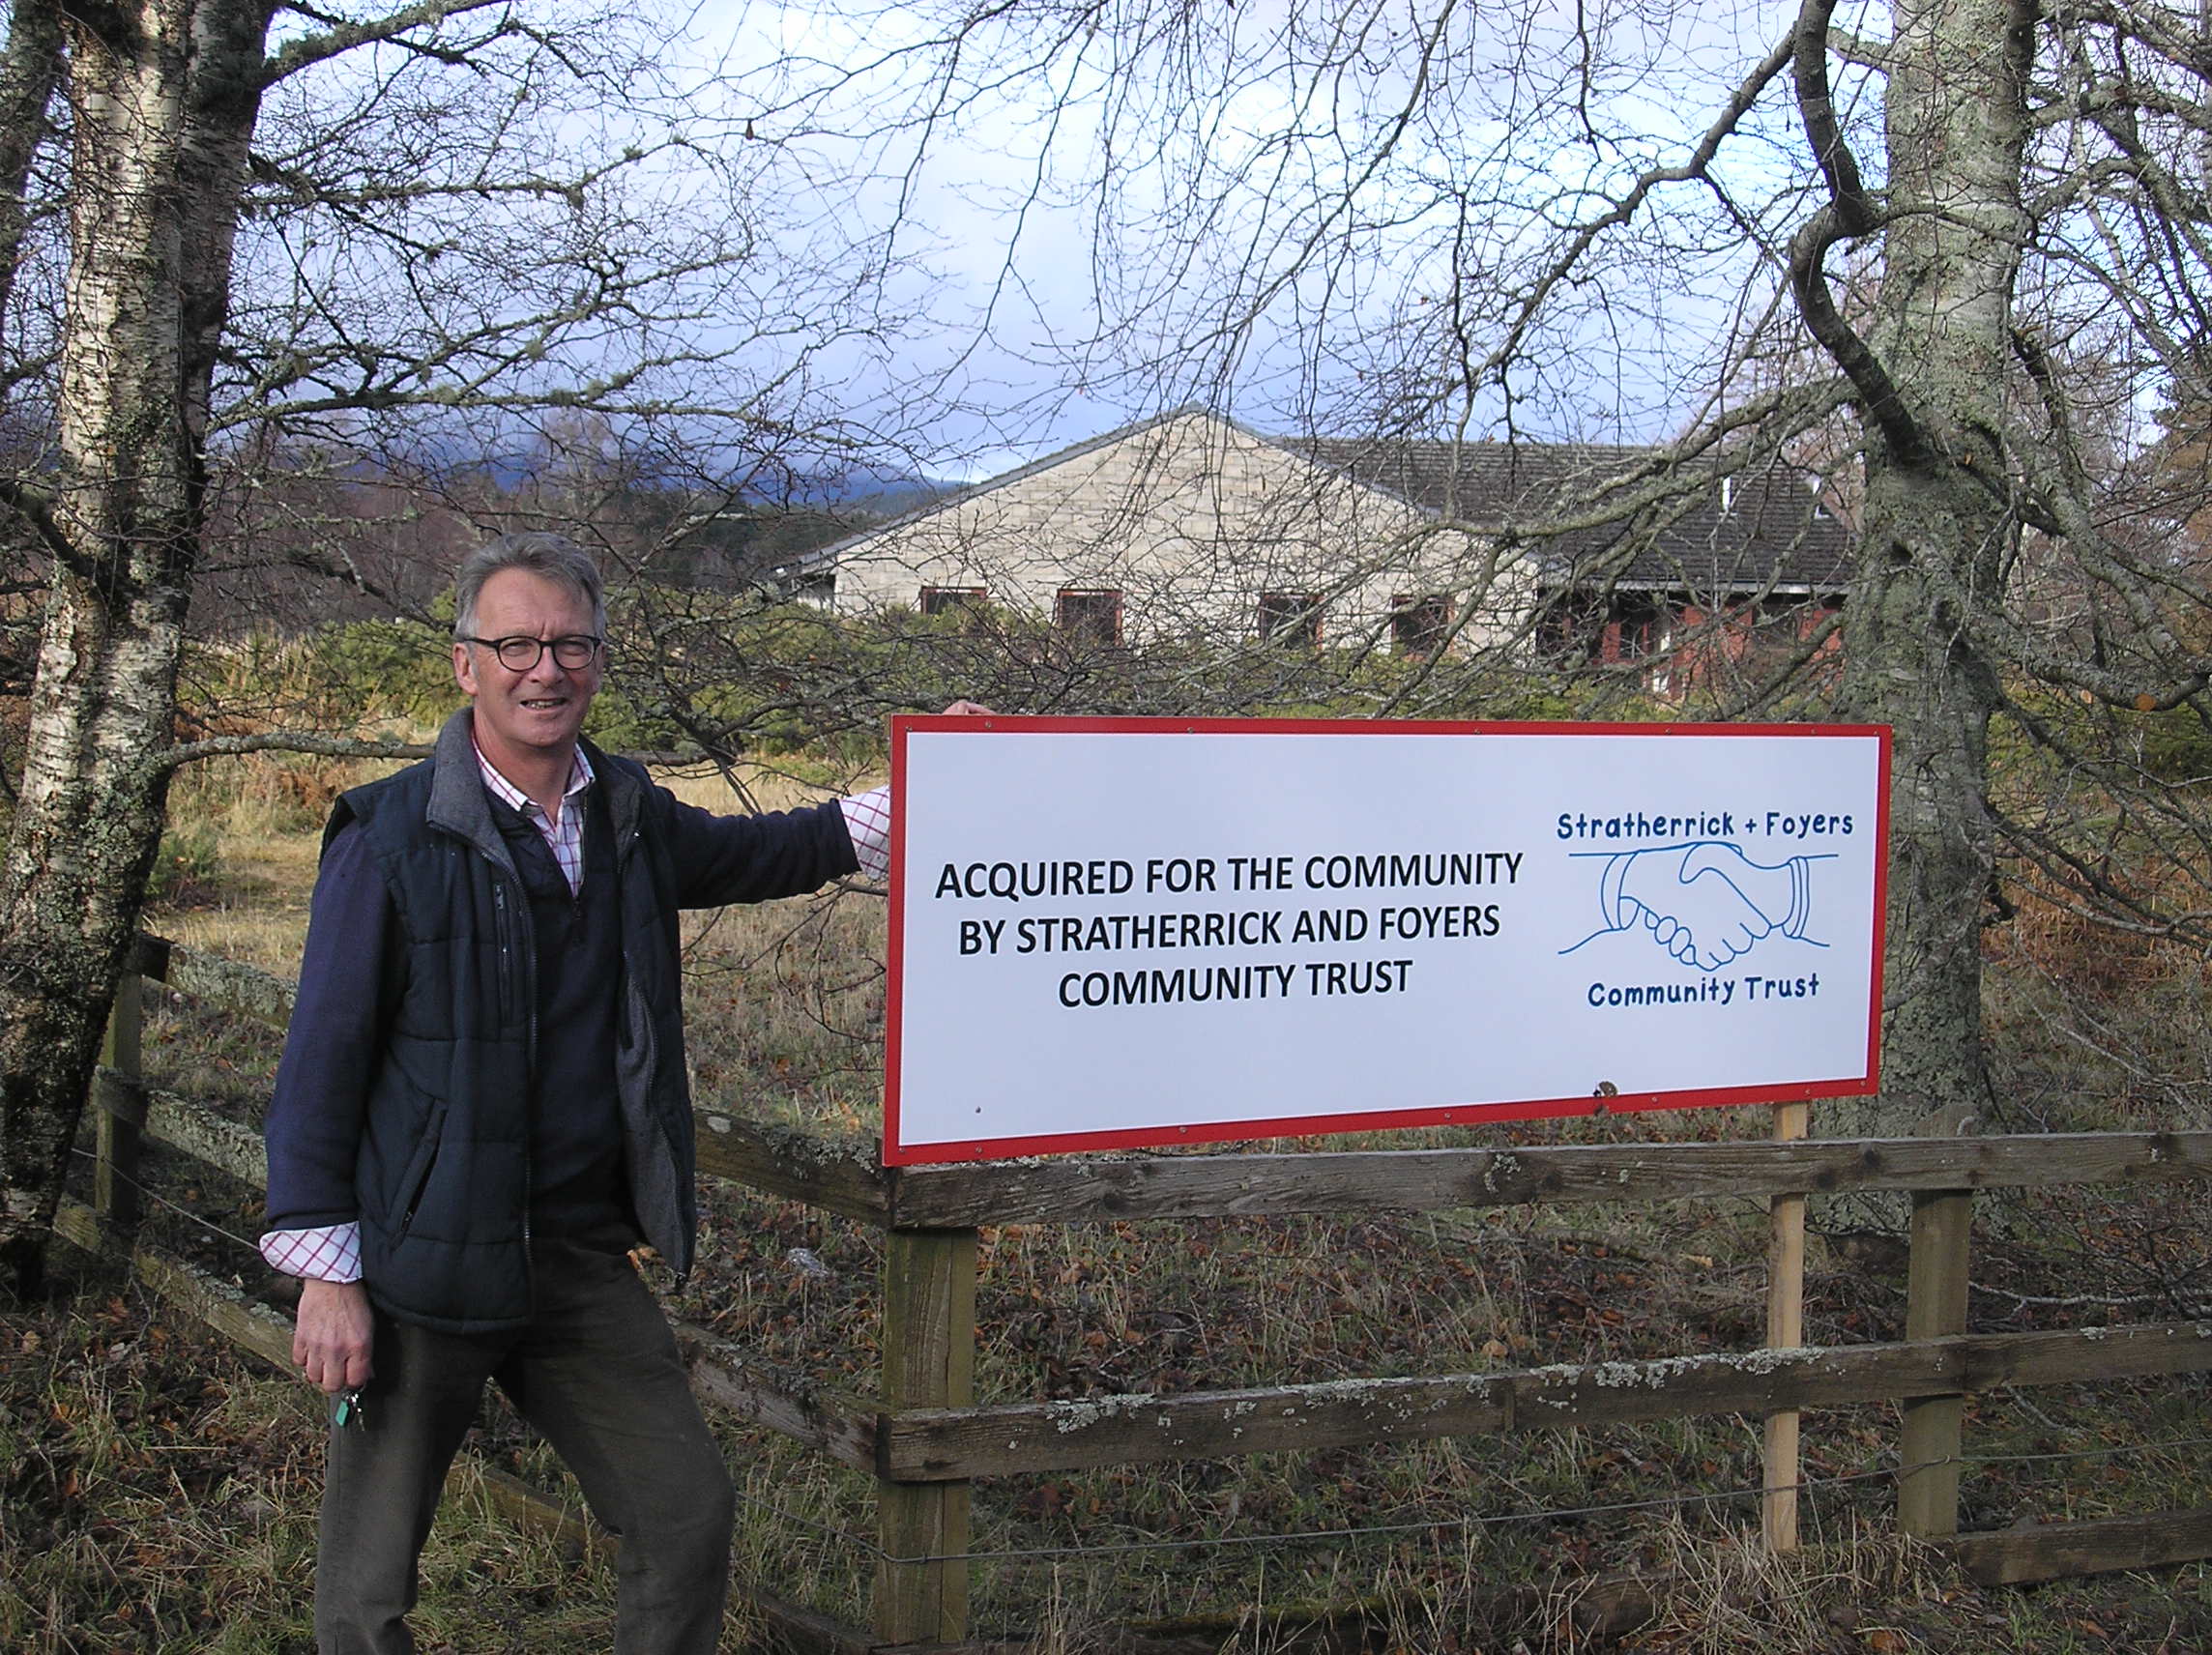 Peter J Faye, Chairman of Stratherrick and Foyers Community Trust at the new community facility in Whitebridge